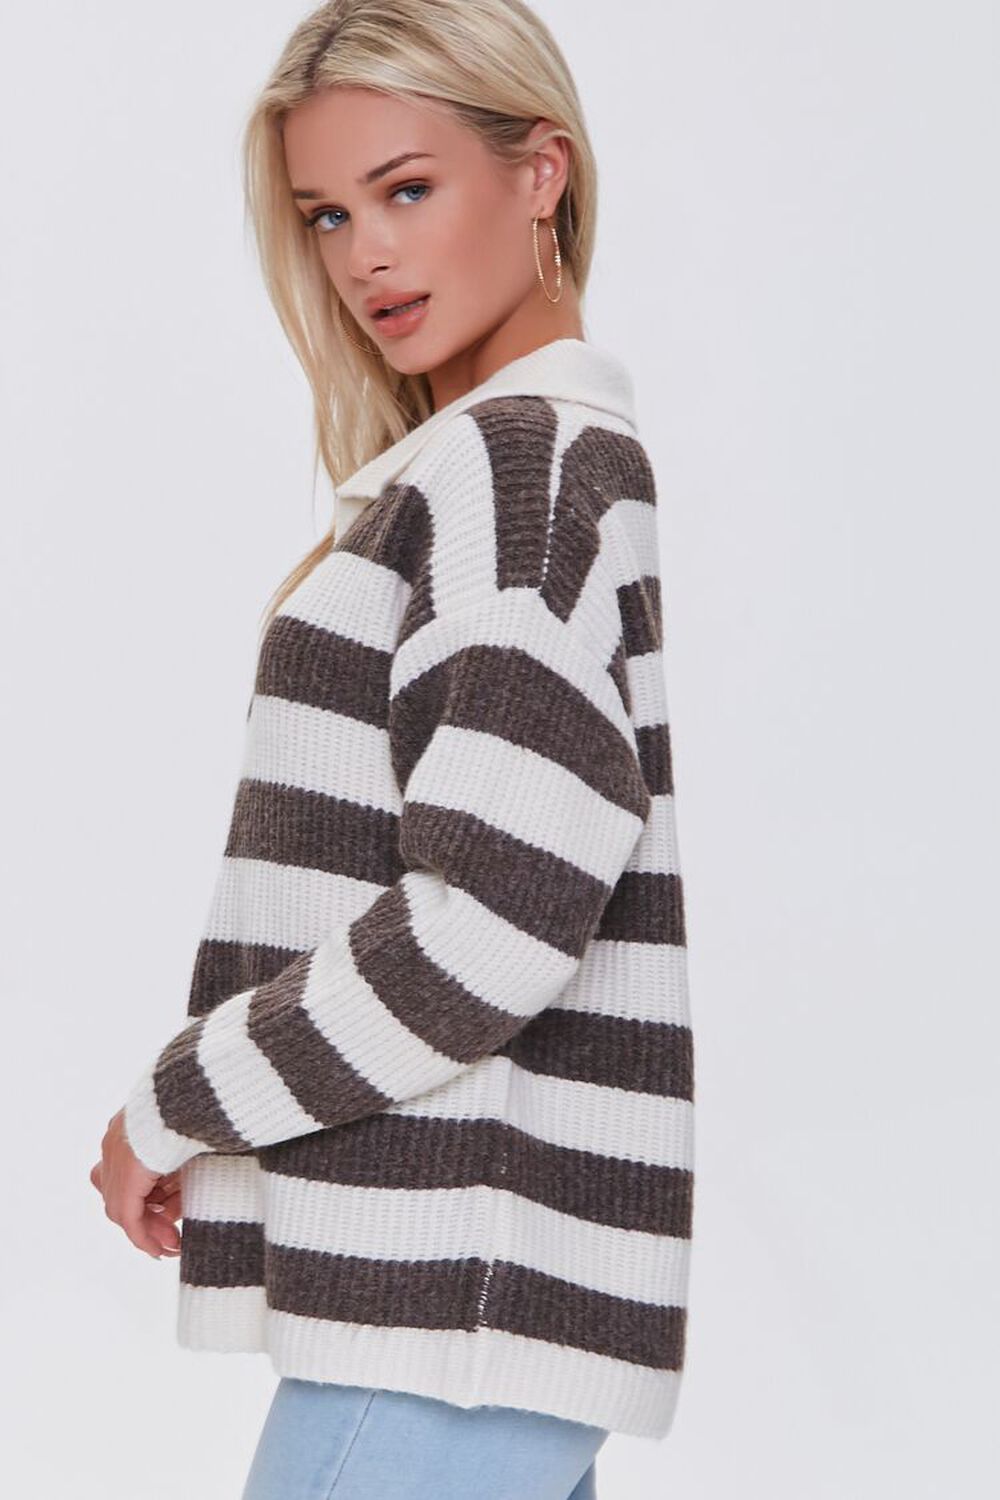 CREAM/BROWN Striped Sweater-Knit Pullover, image 2